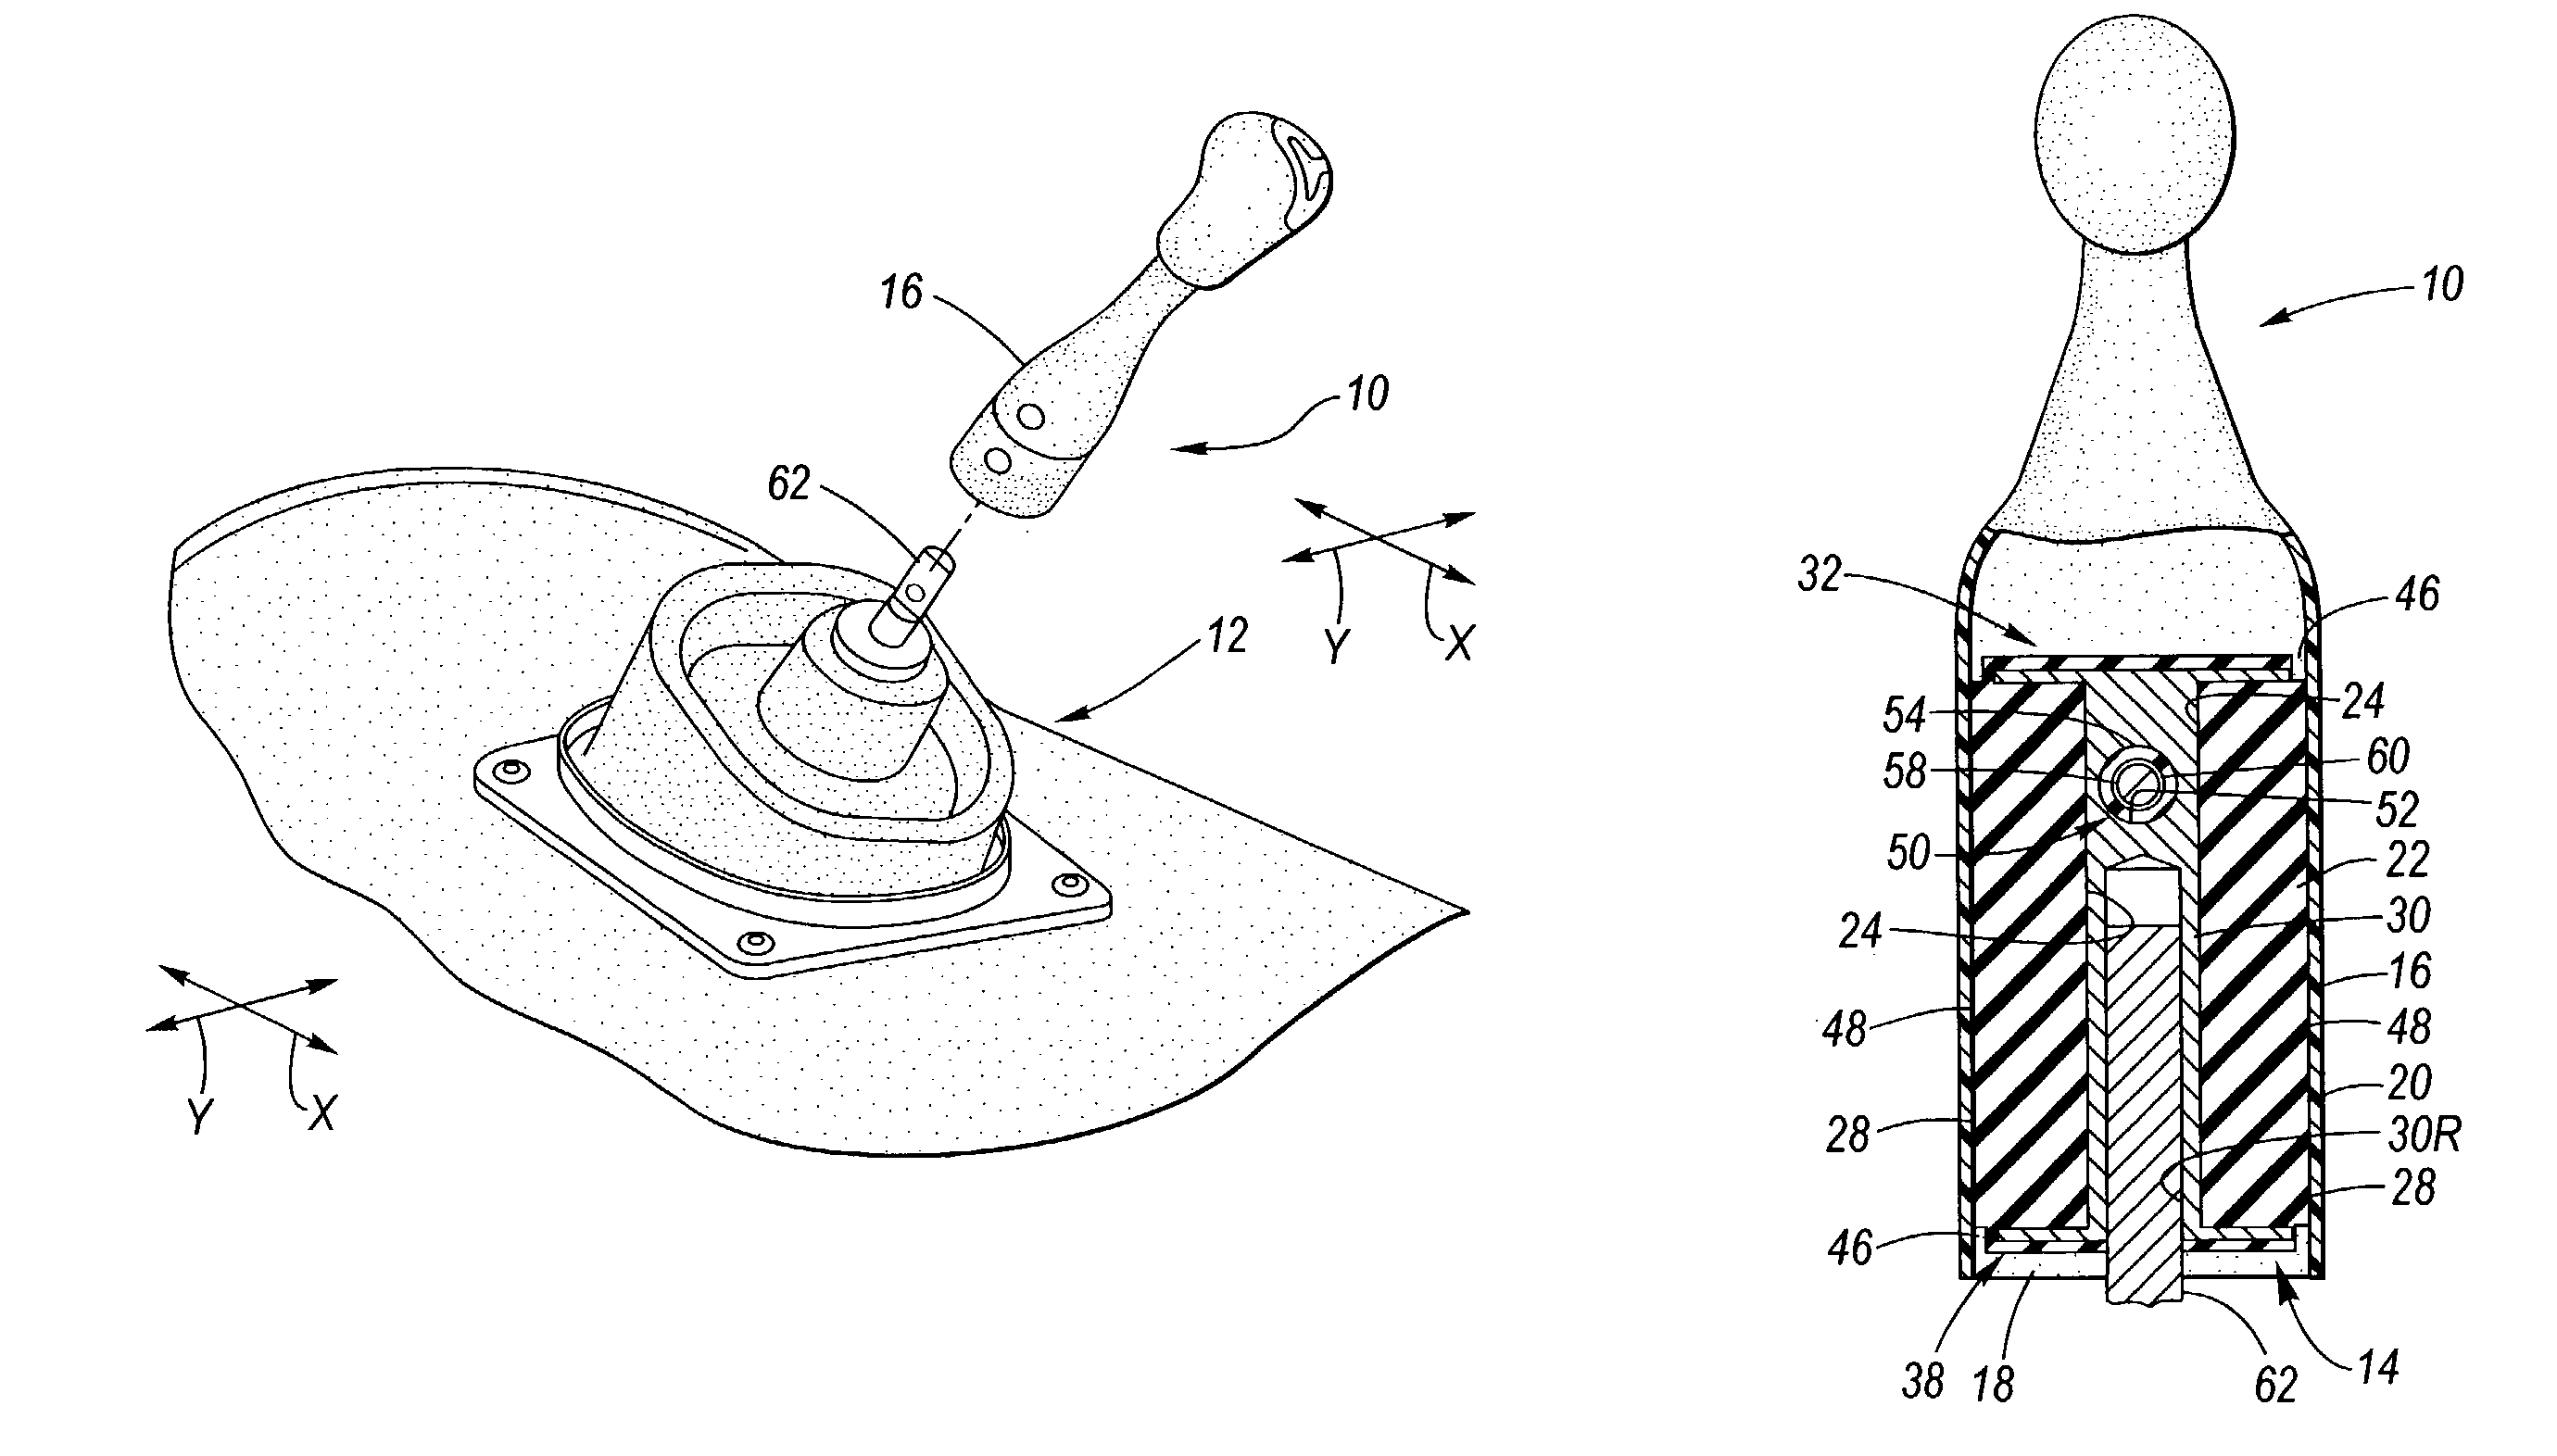 Mechanical attachment for a shift lever vibration isolator